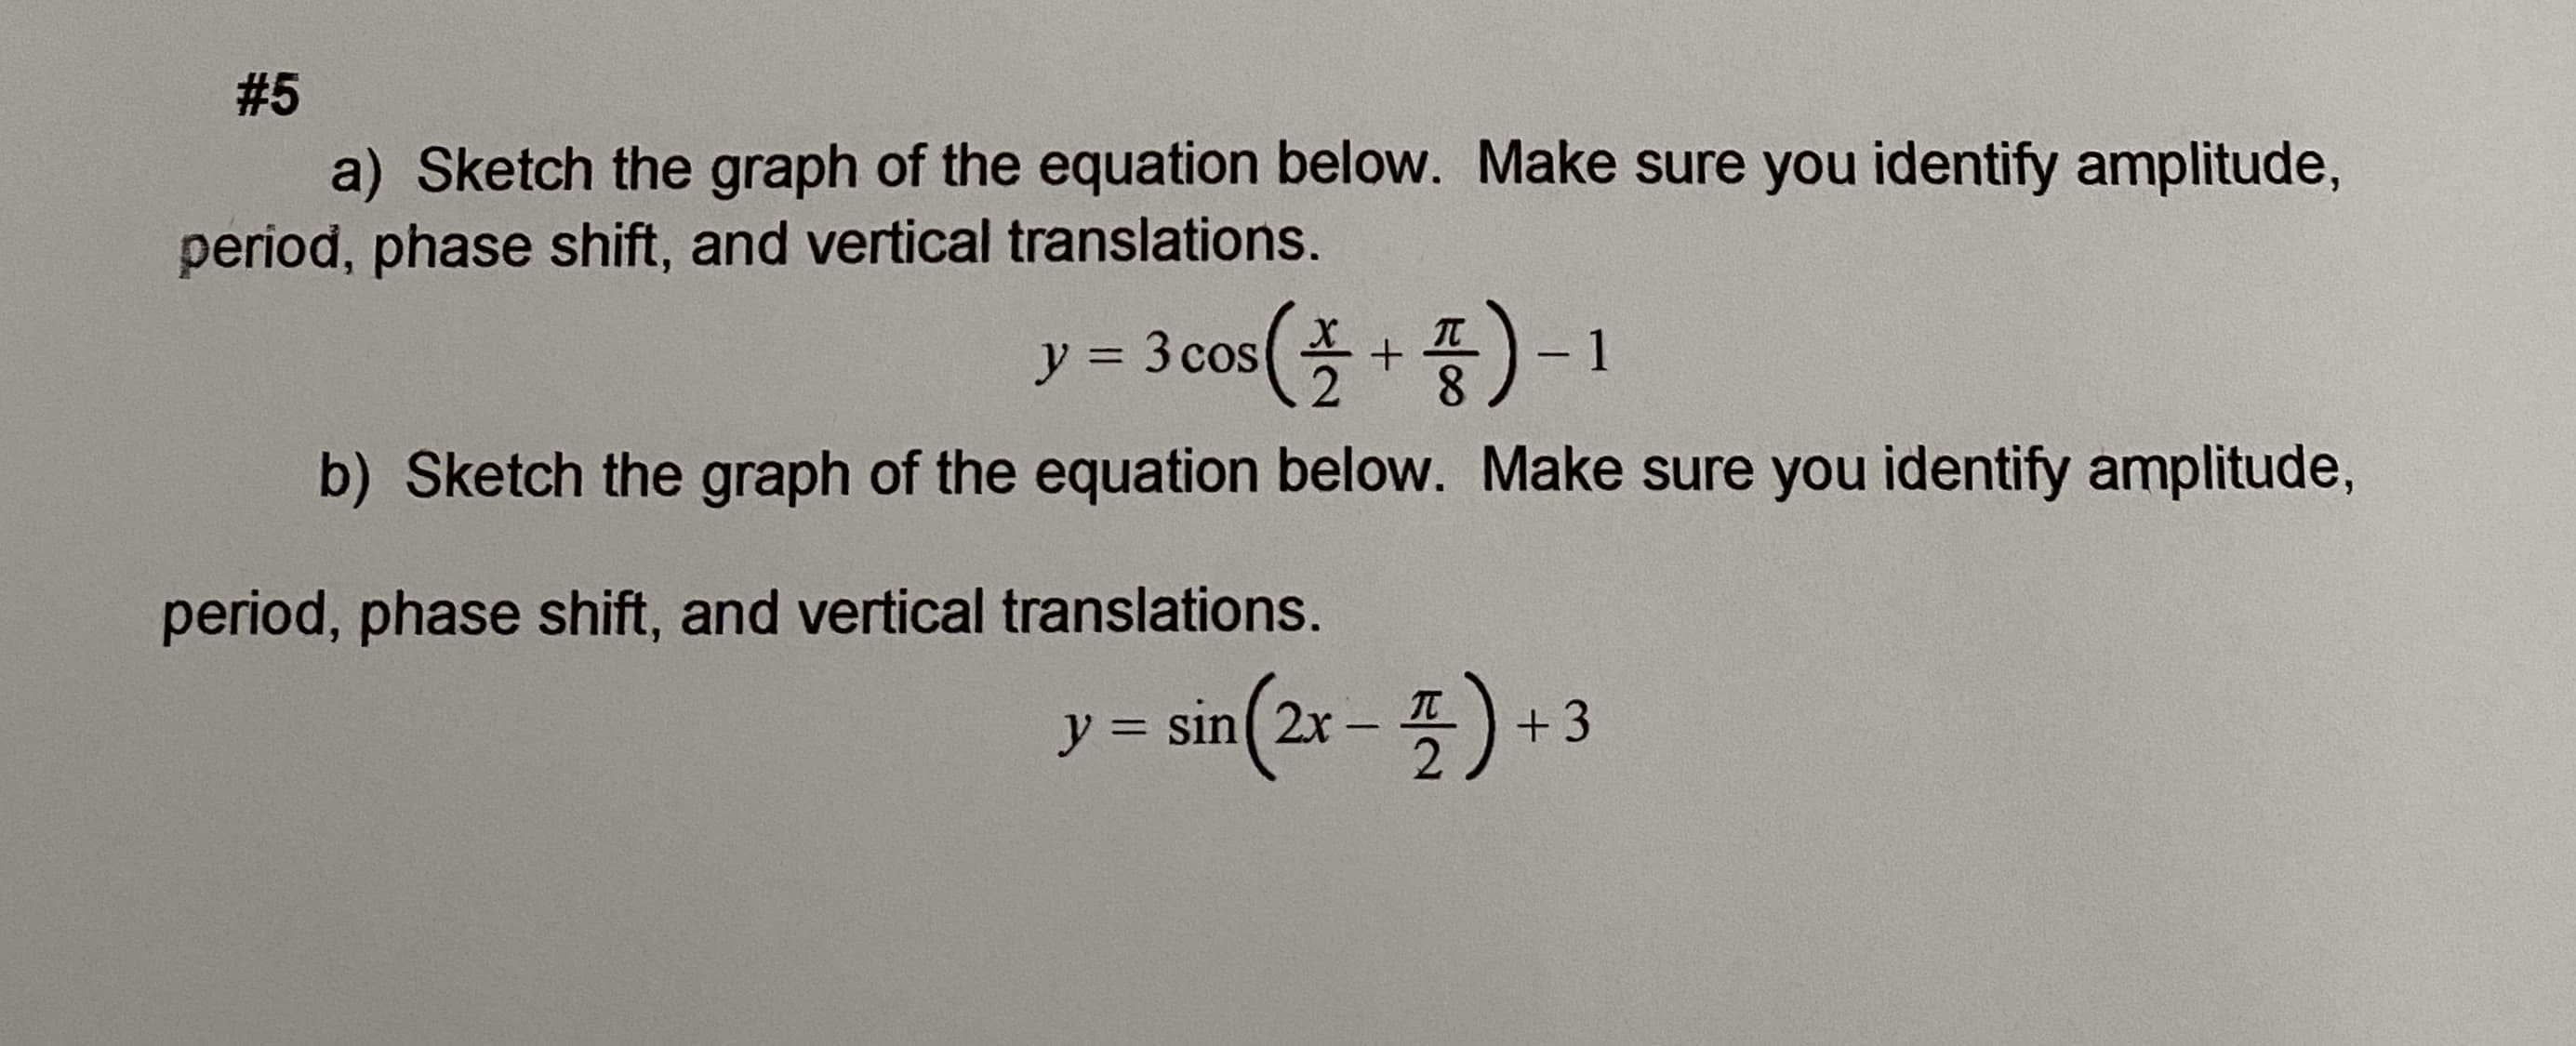 a) Sketch the graph of the equation below. Make sure you identify amplitude,
period, phase shift, and vertical translations.
(폭+품)-1
y = 3 cos
8.
b) Sketch the graph of the equation below. Make sure you identify amplitude,
period, phase shift, and vertical translations.
5) +3
y = sin( 2x -
IT
%3D
|
